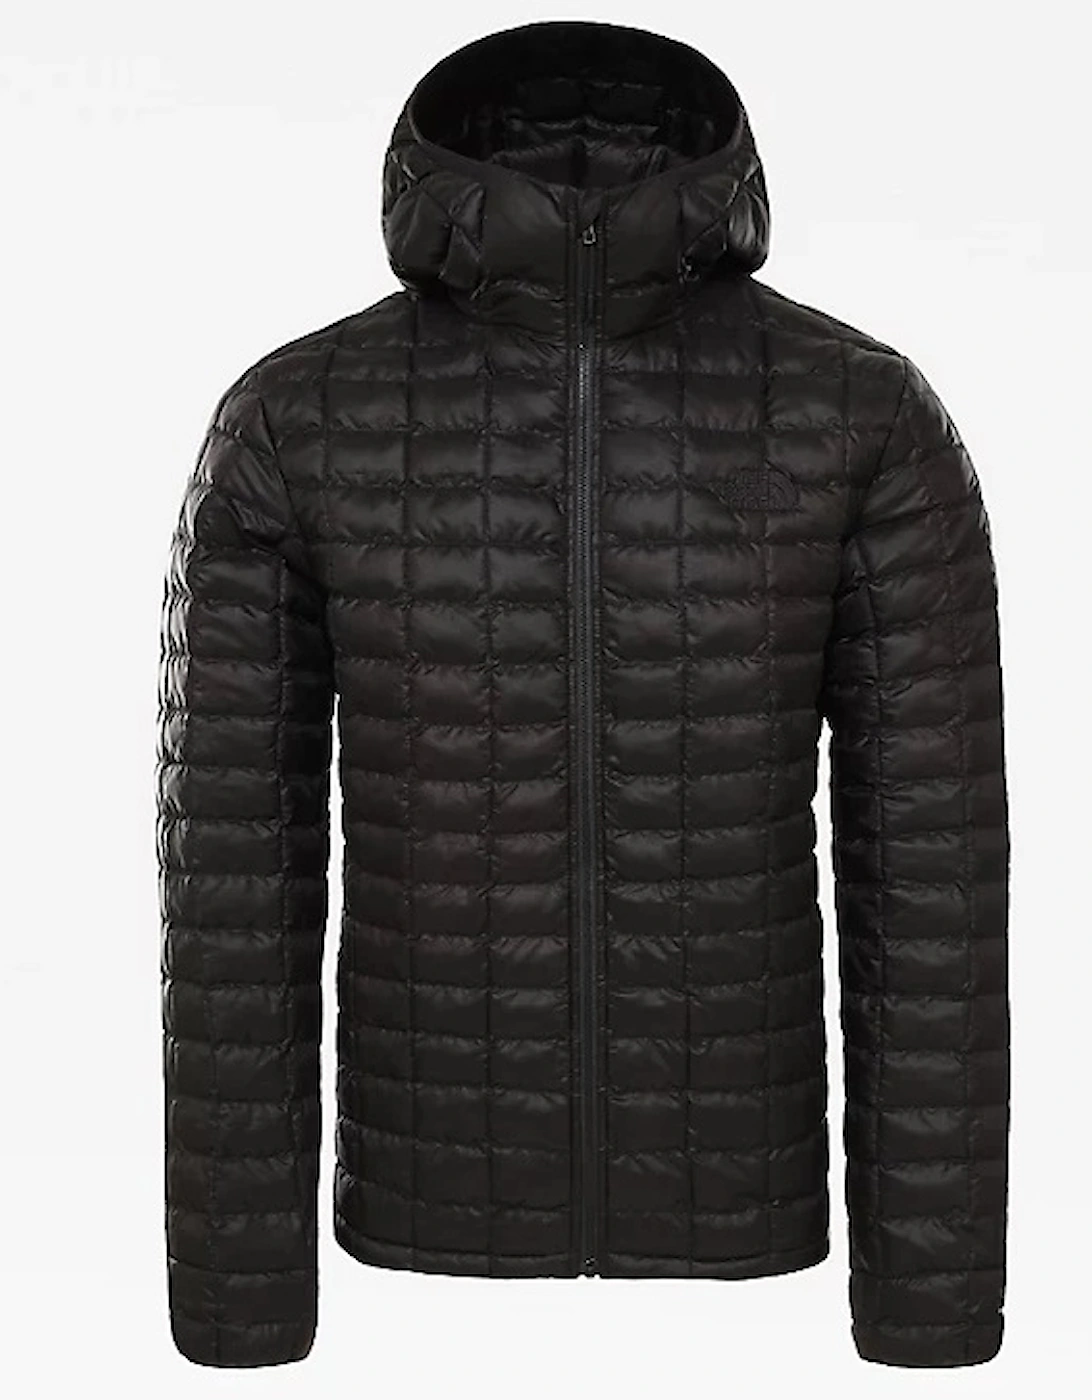 Men's Thermoball Eco Hooded Jacket Black Matte